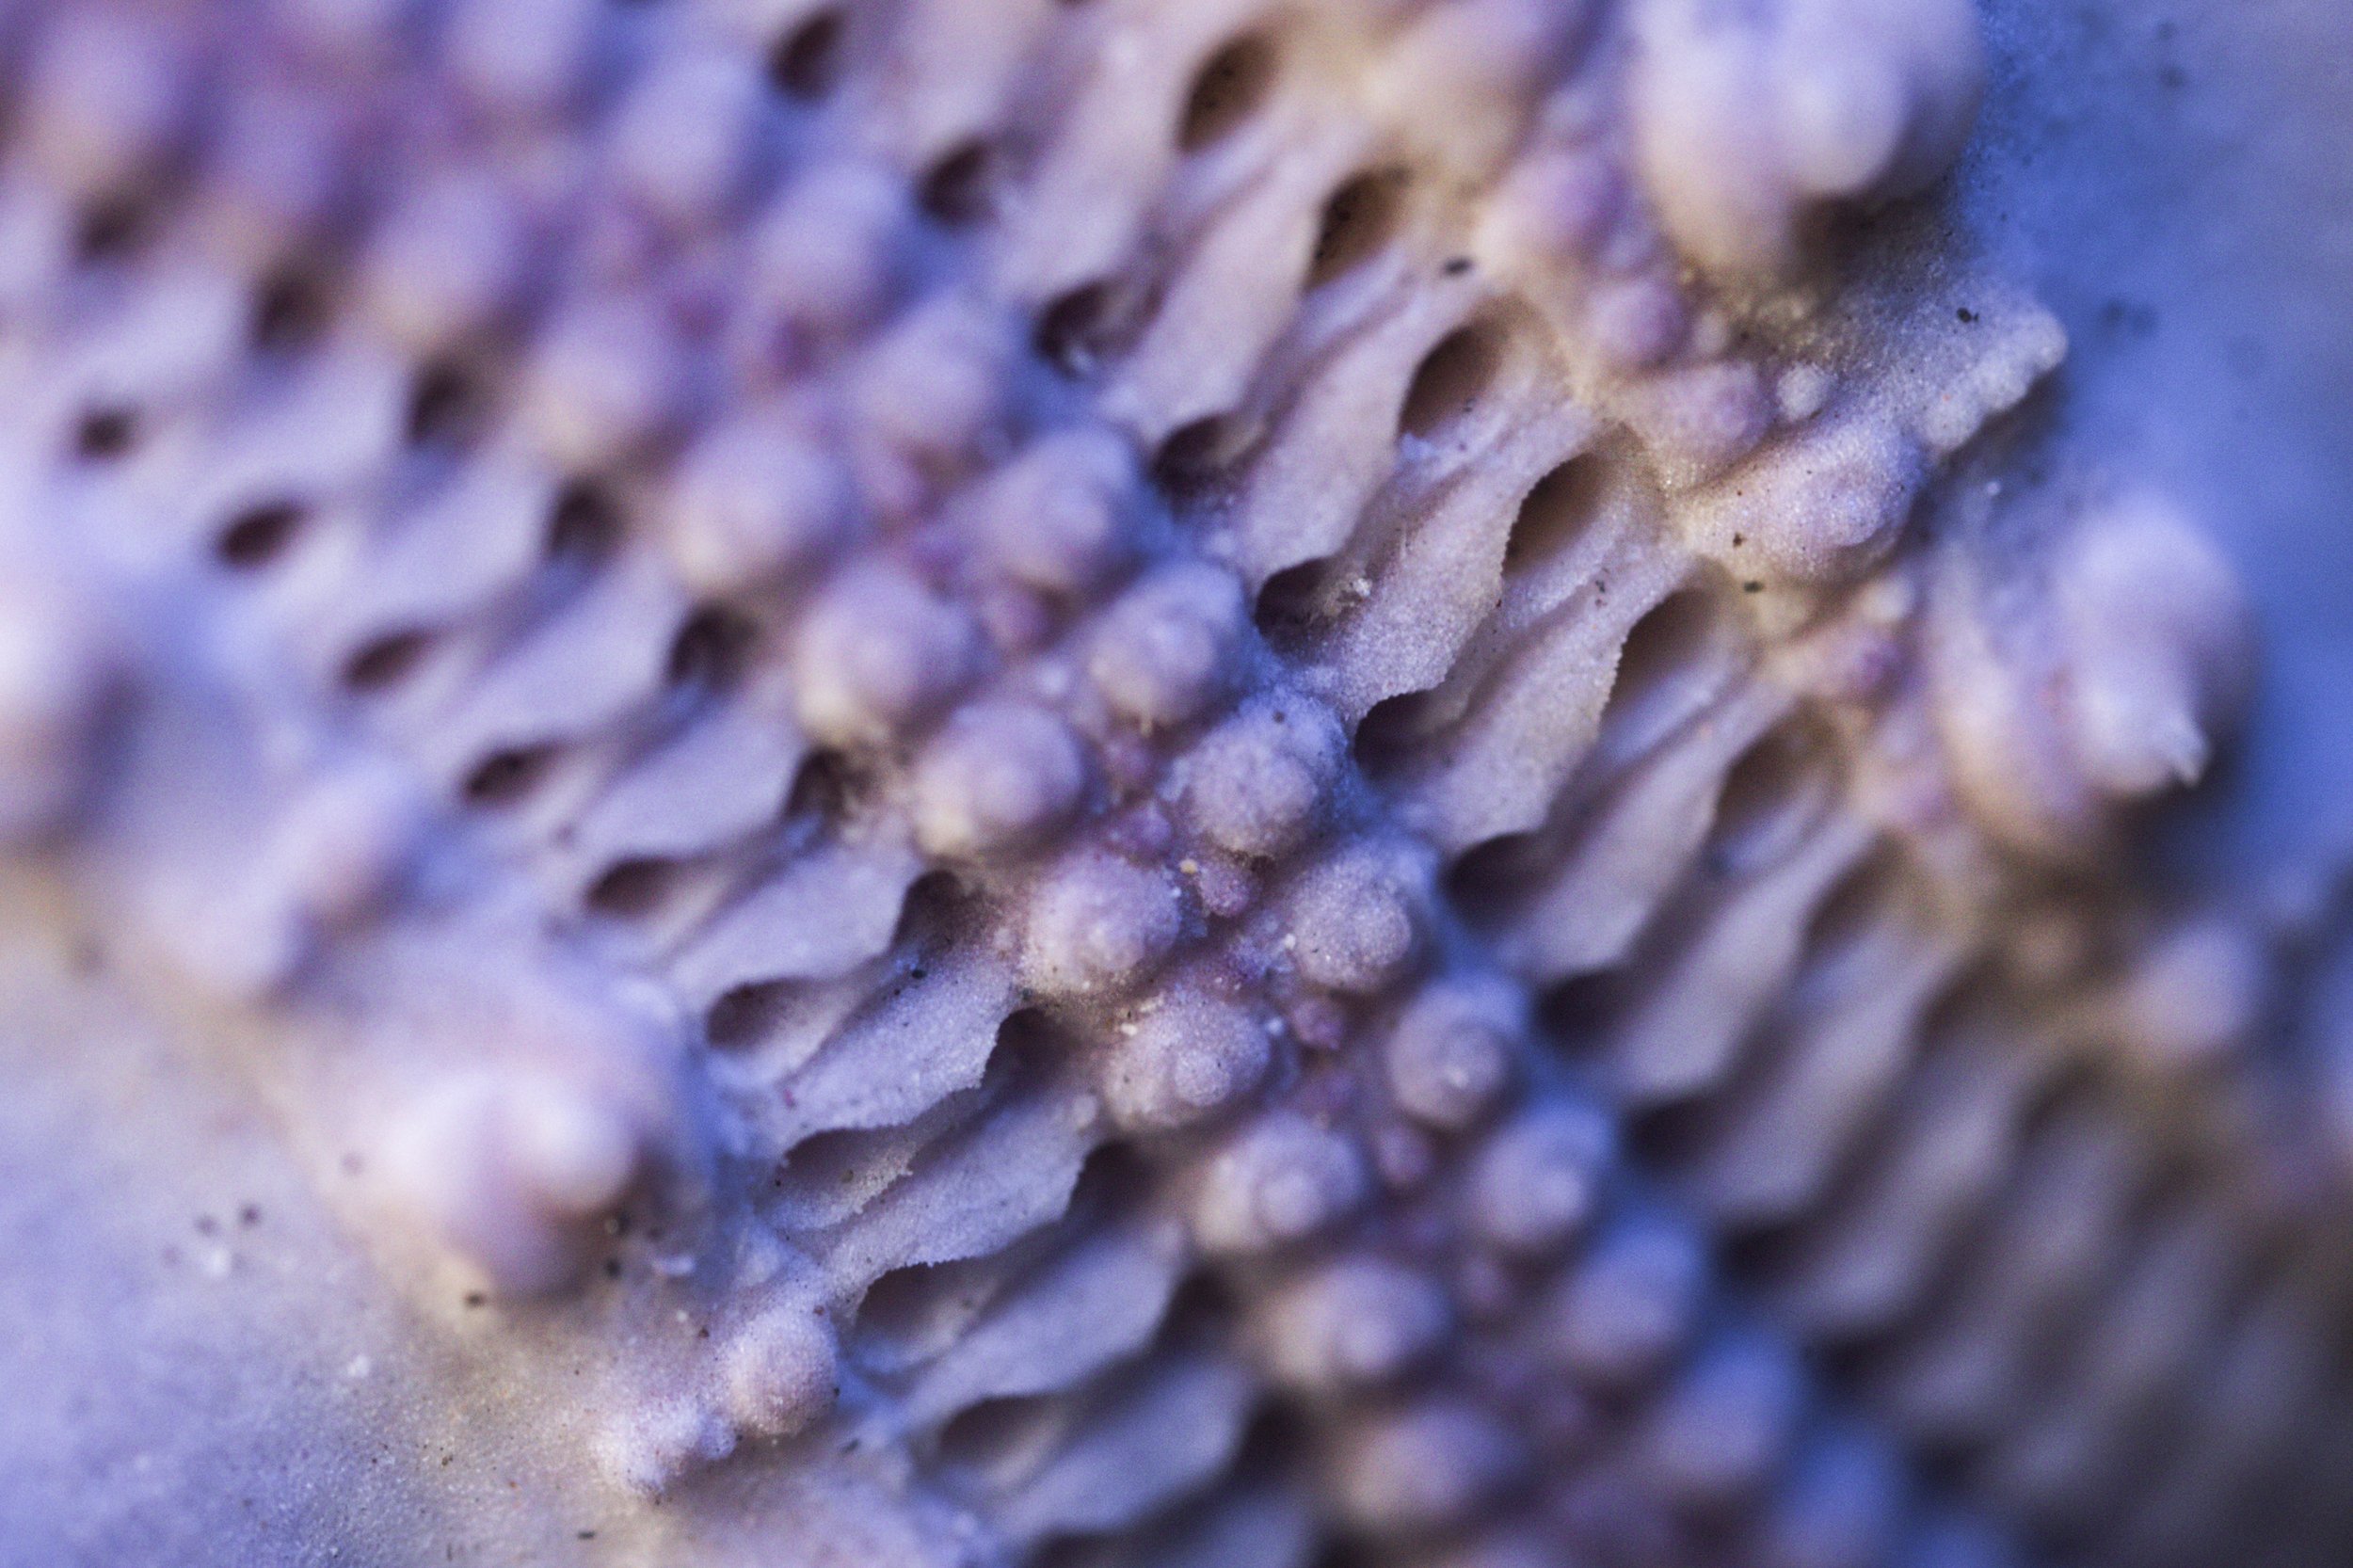  Close up details of a Pencil spine sea urchins as seen through ultra macro photography at the Museum of Zoology of Kasetsart University, Bangkok, Thailand. Sea urchins are among the most vulnerable to the impact of elevated acidity since they requir